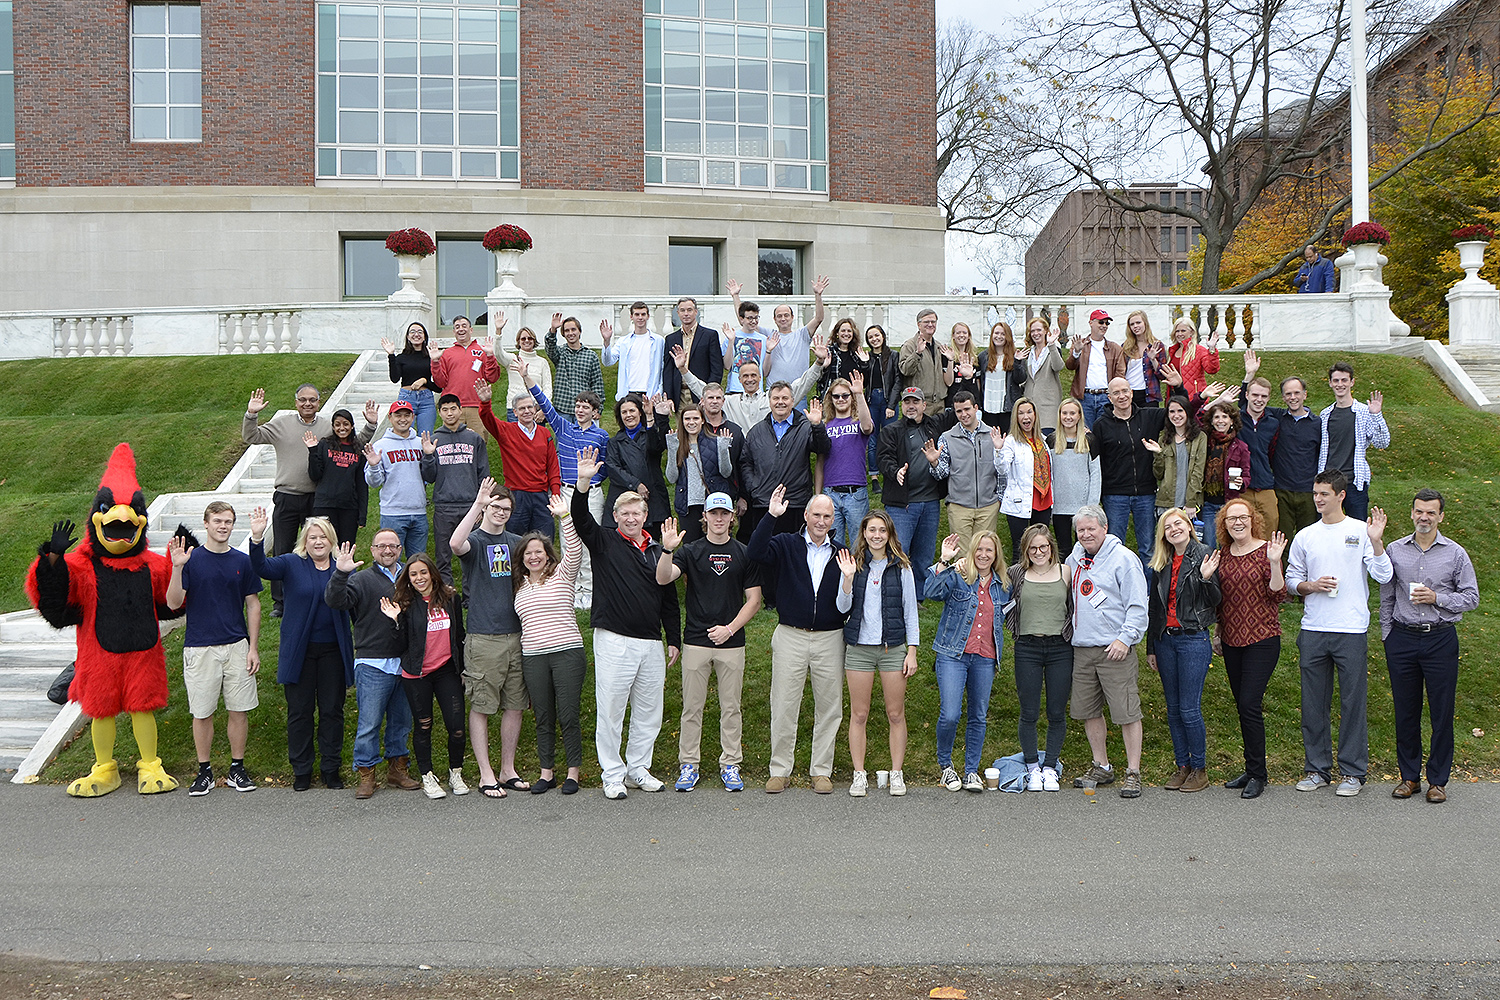 Alumni and their children joined in for Homecoming Weekend's annual legacy photo on Nov. 7, taken on Denison Terrace. (Photo by John Van Vlack)